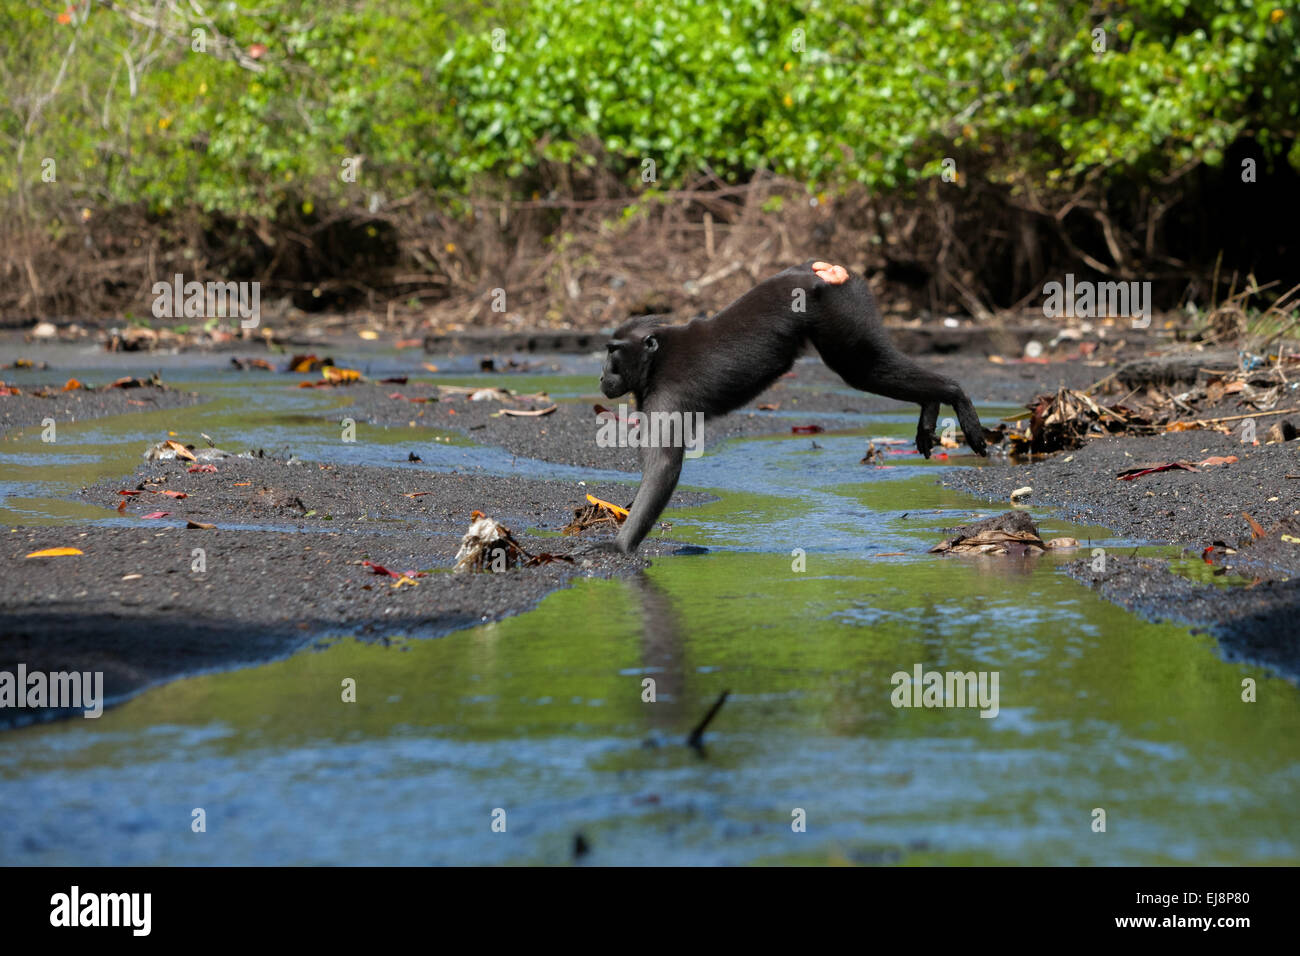 A crested macaque (Macaca nigra) leaps as it is foraging on a stream close to a beach in Tangkoko forest, North Sulawesi, Indonesia. Stock Photo